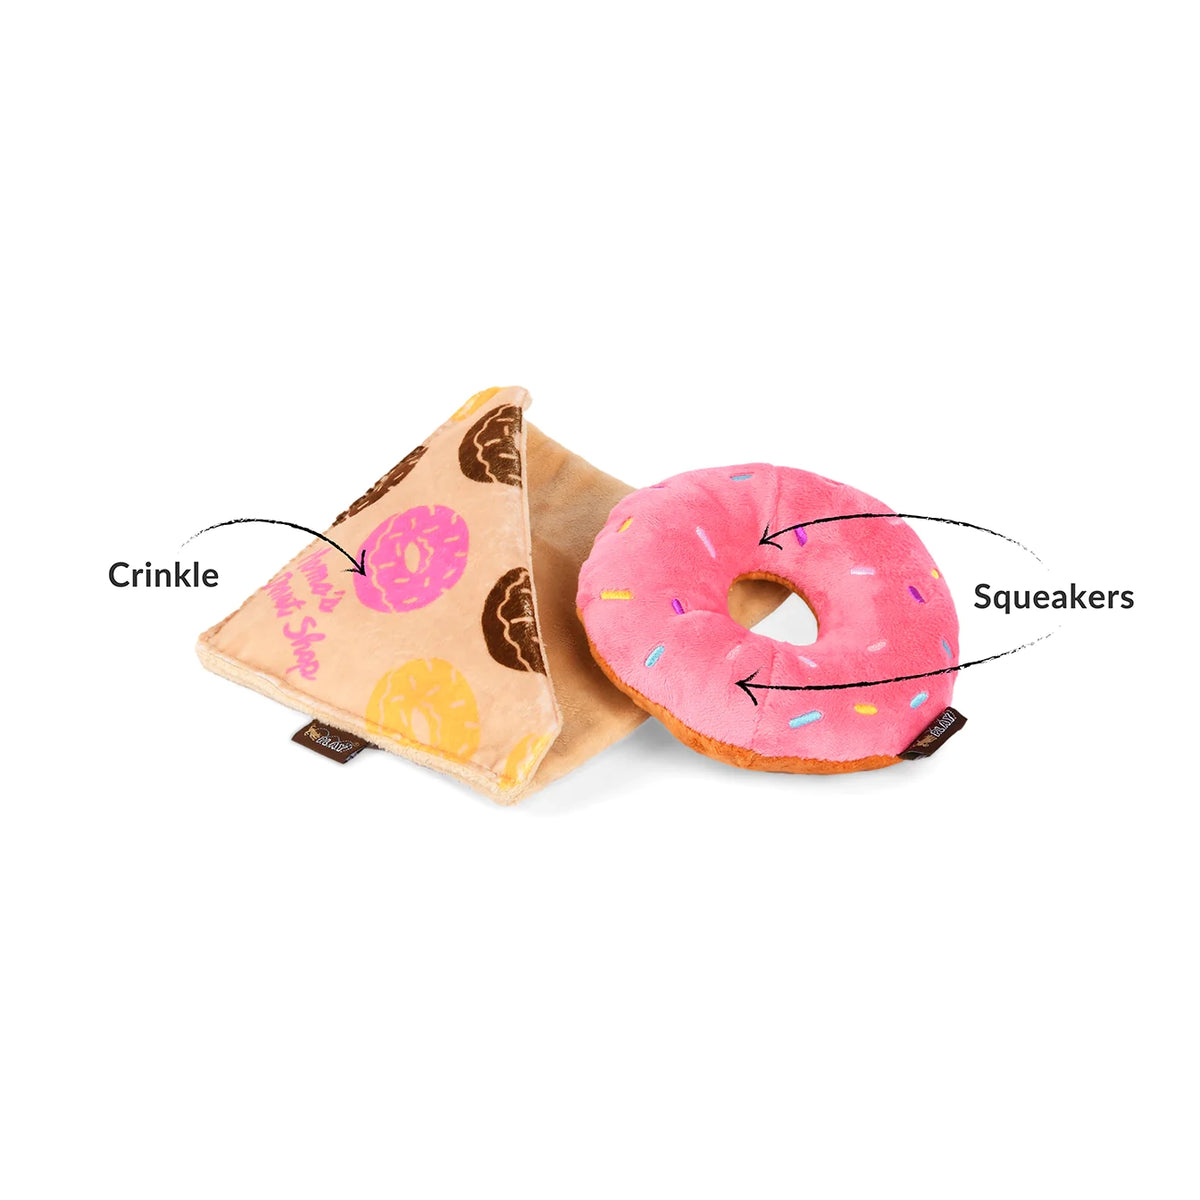 Food Dog Toys, Coffee and Donuts Dog Toy